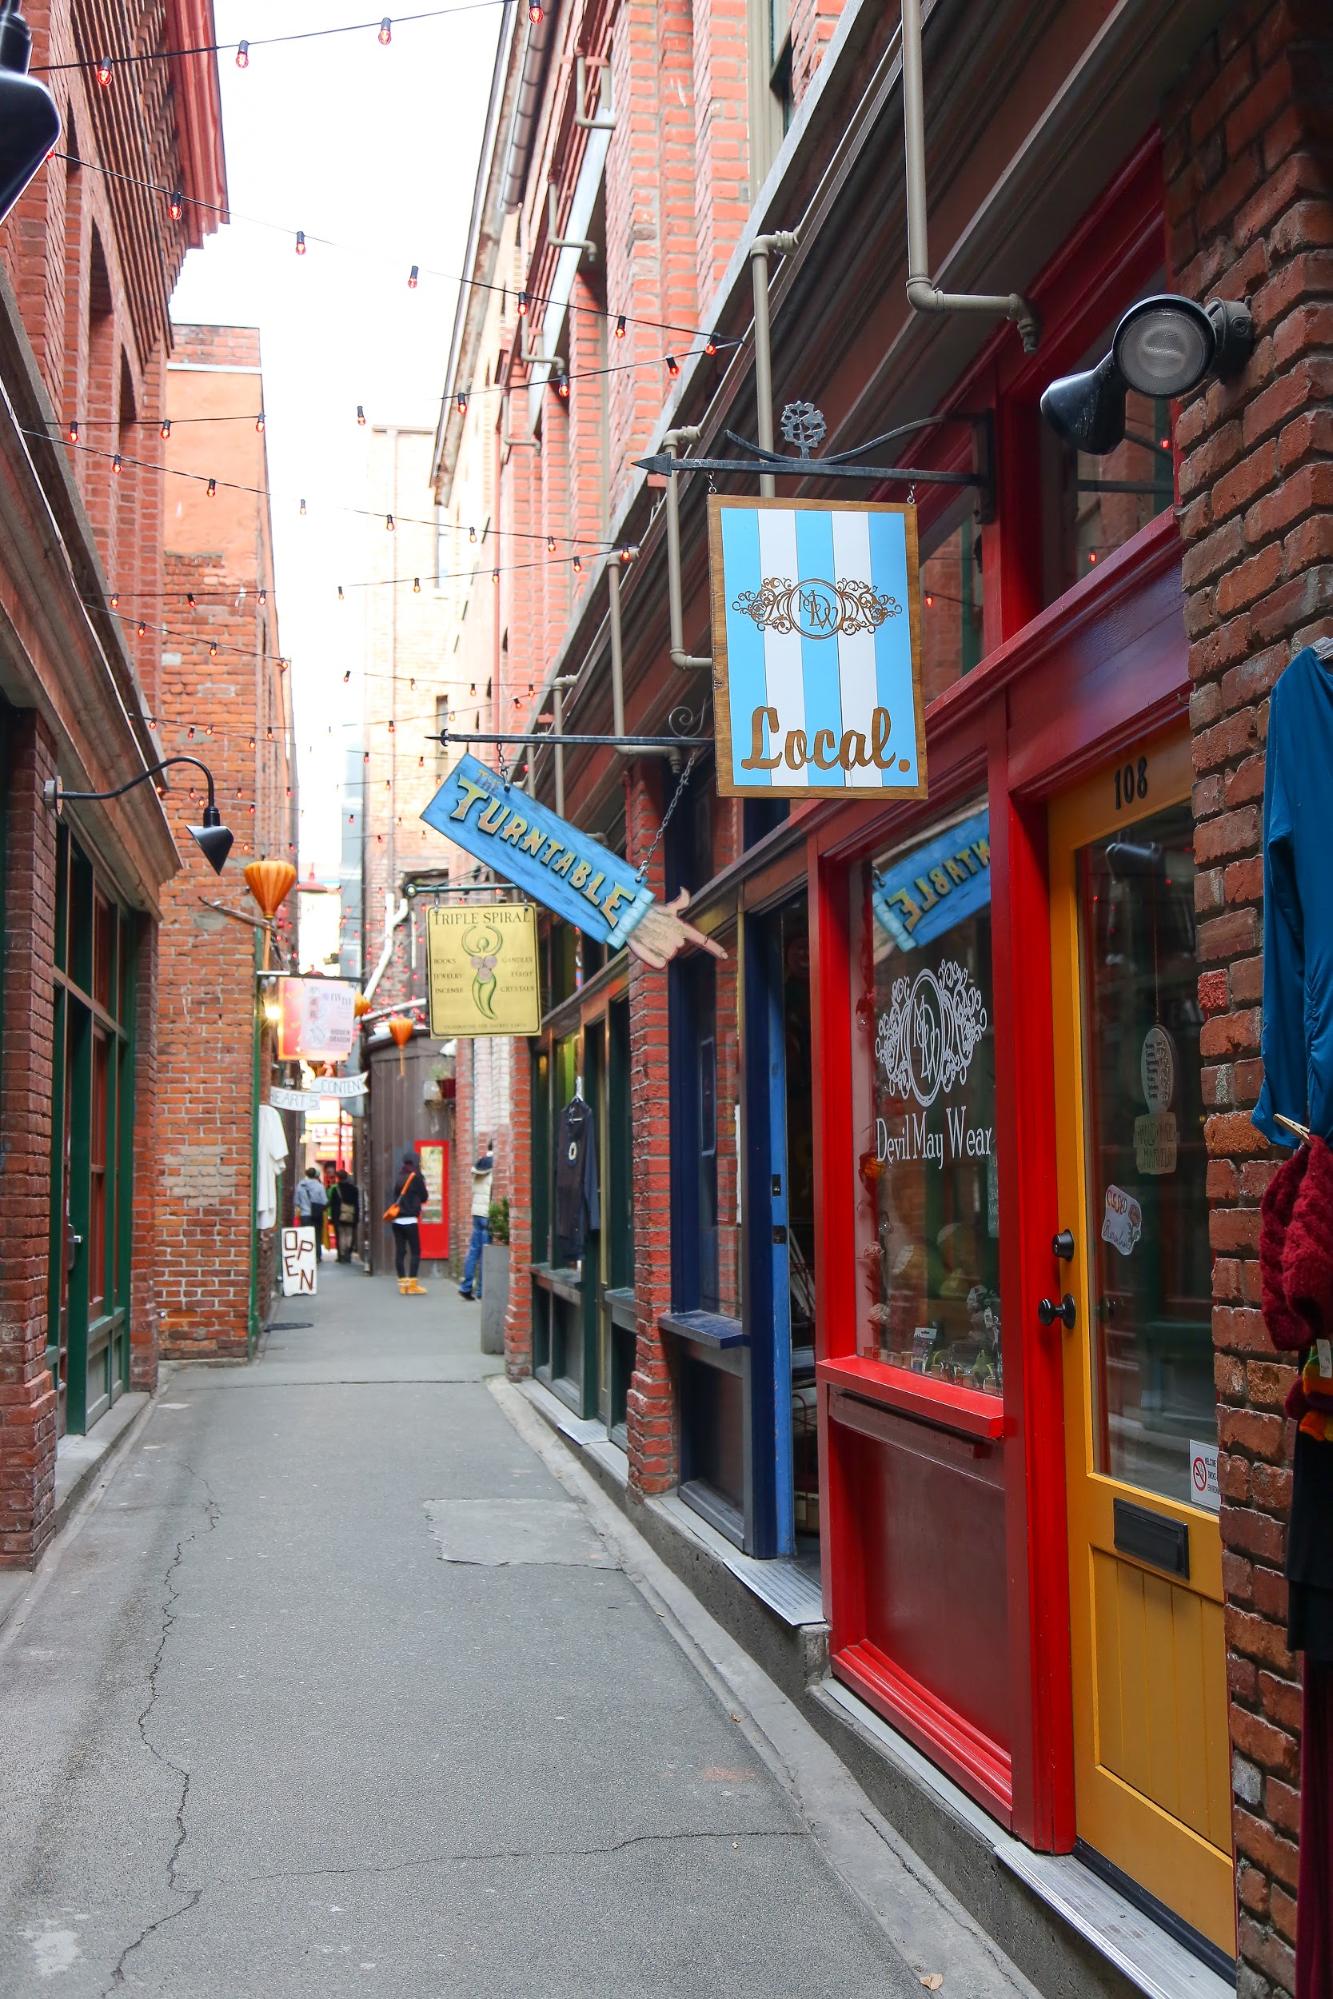 A narrow alleyway lined with colourful shops.